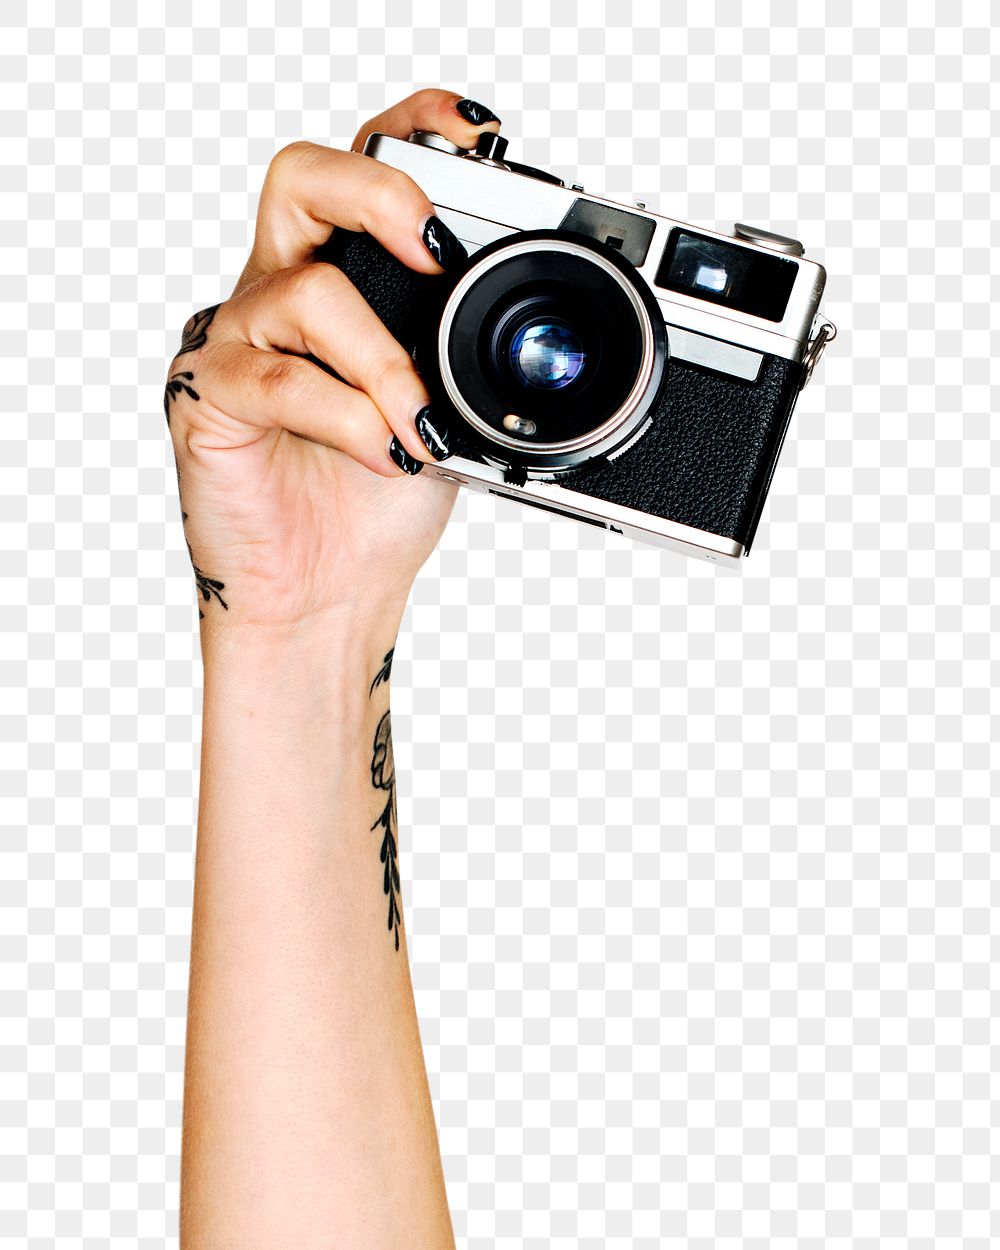 Camera png in hand sticker on transparent background